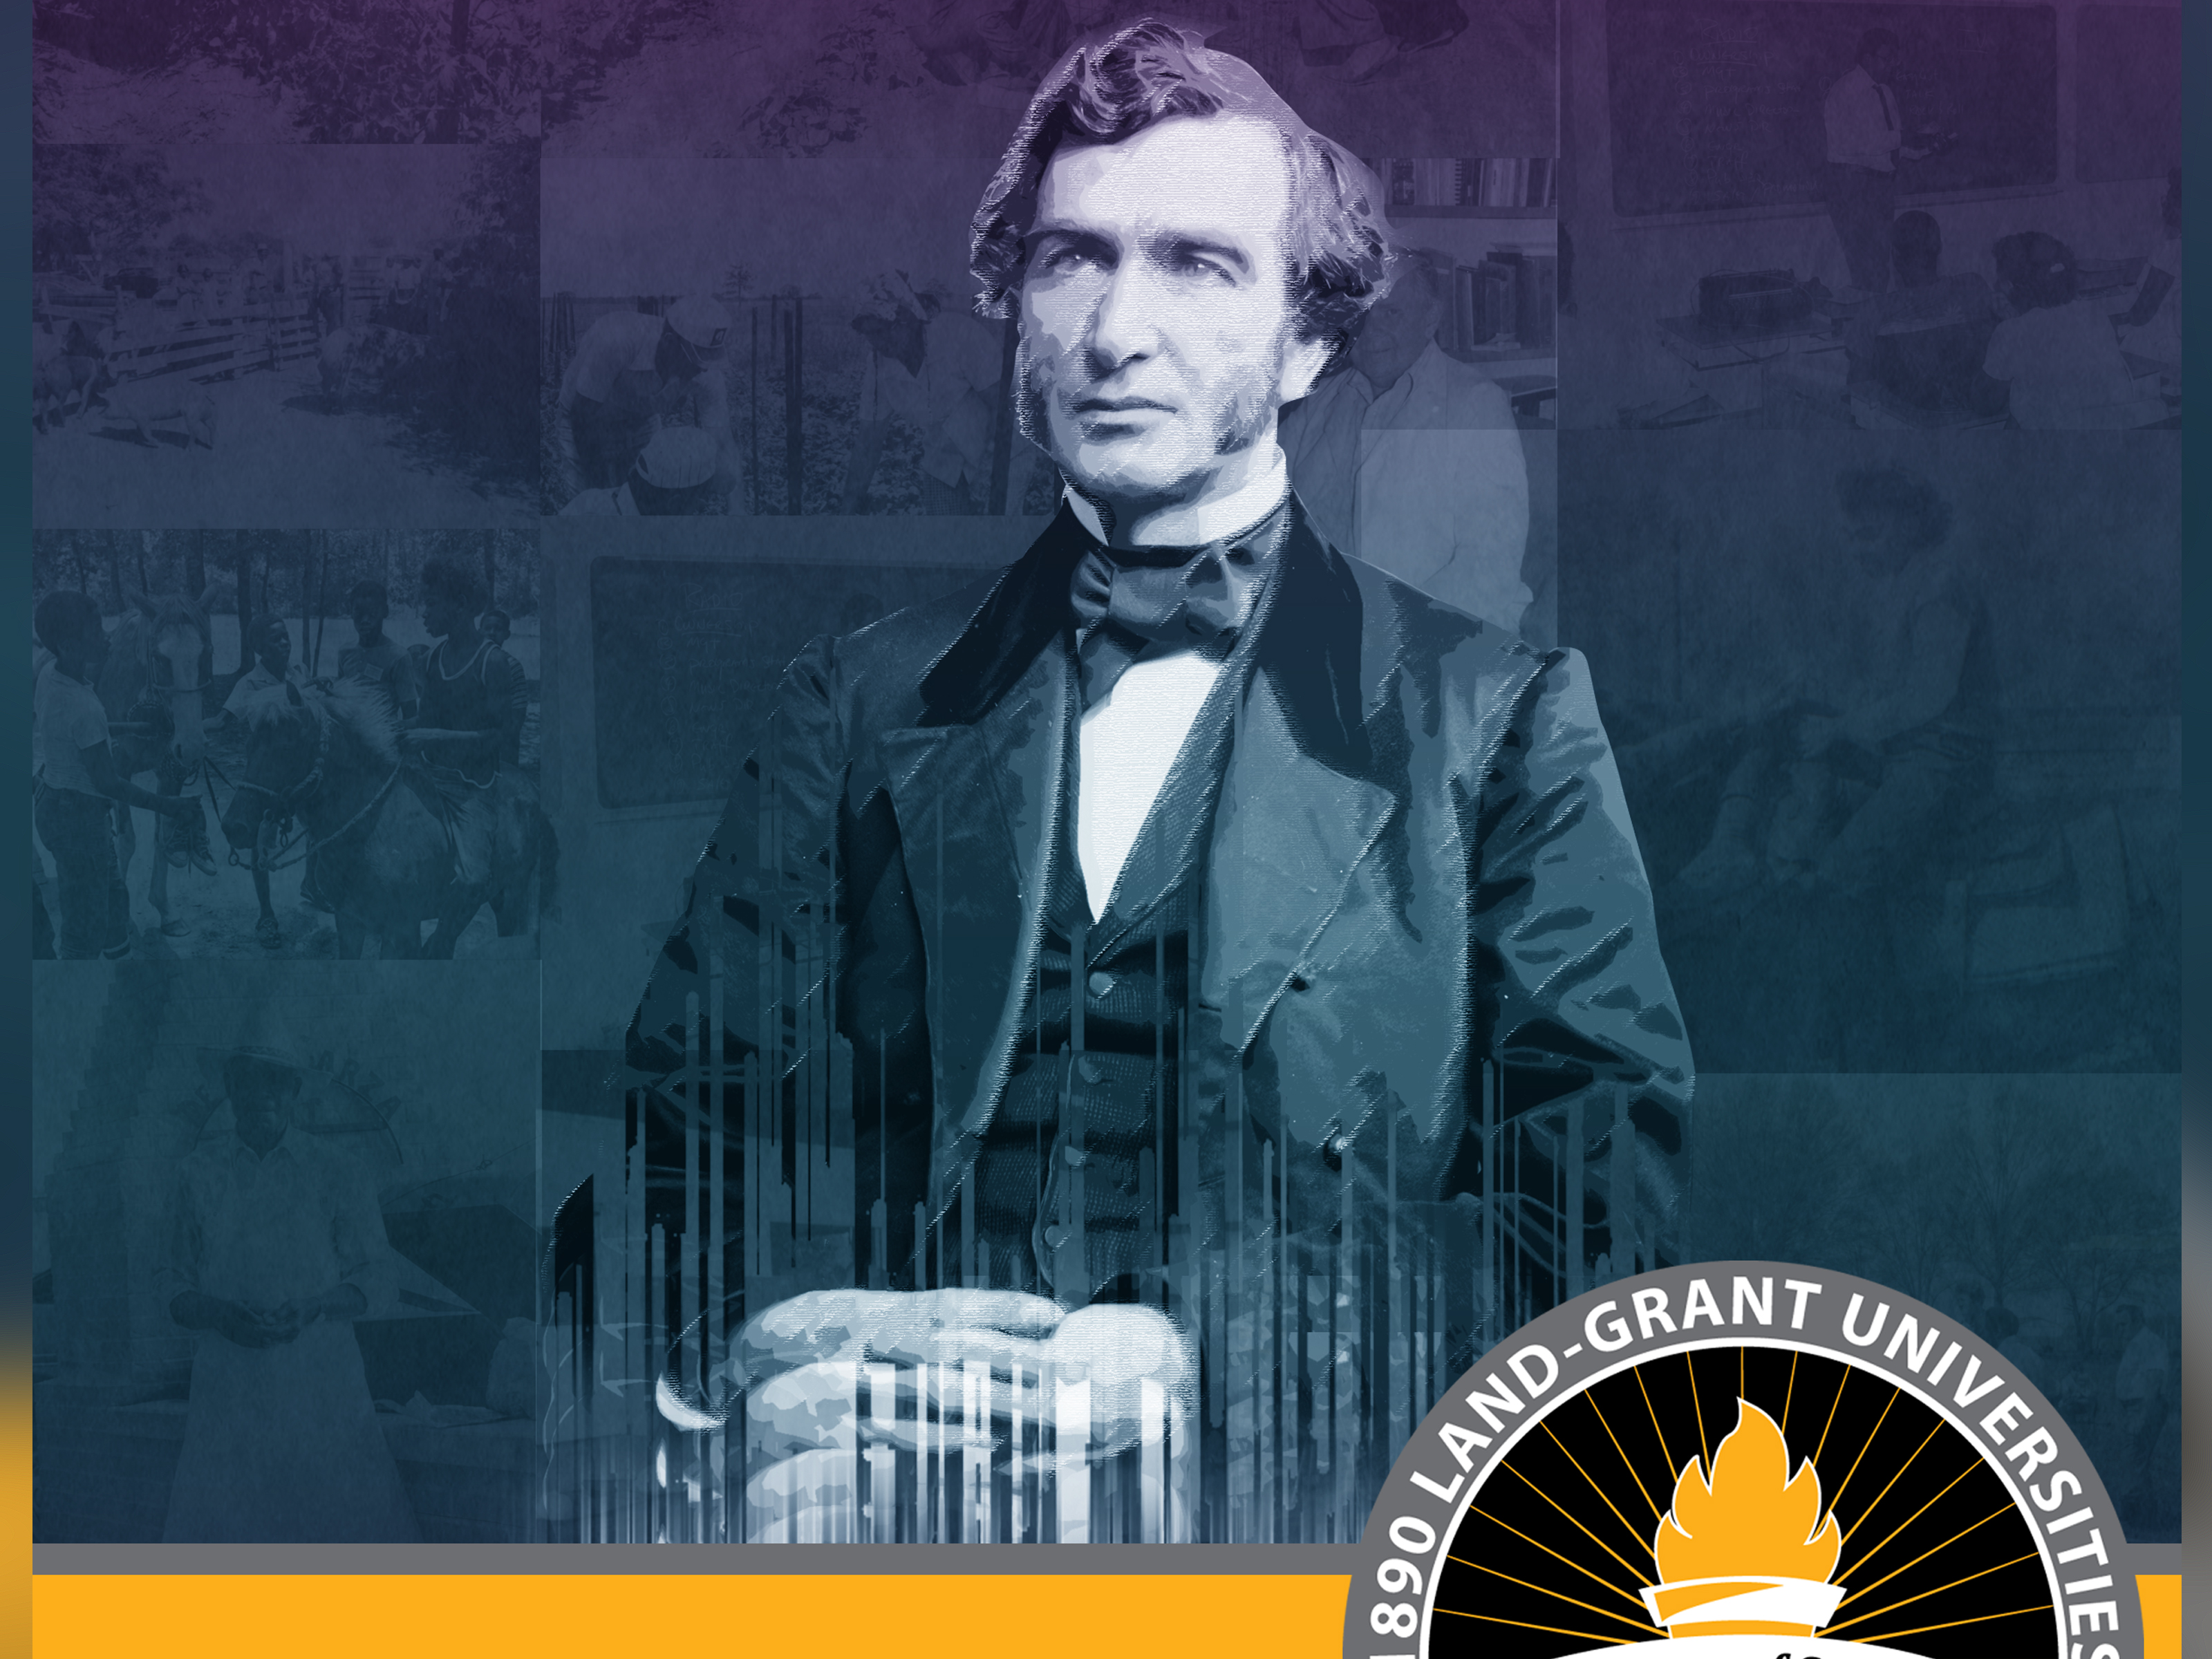 125th Anniversary of The Second Morrill Act